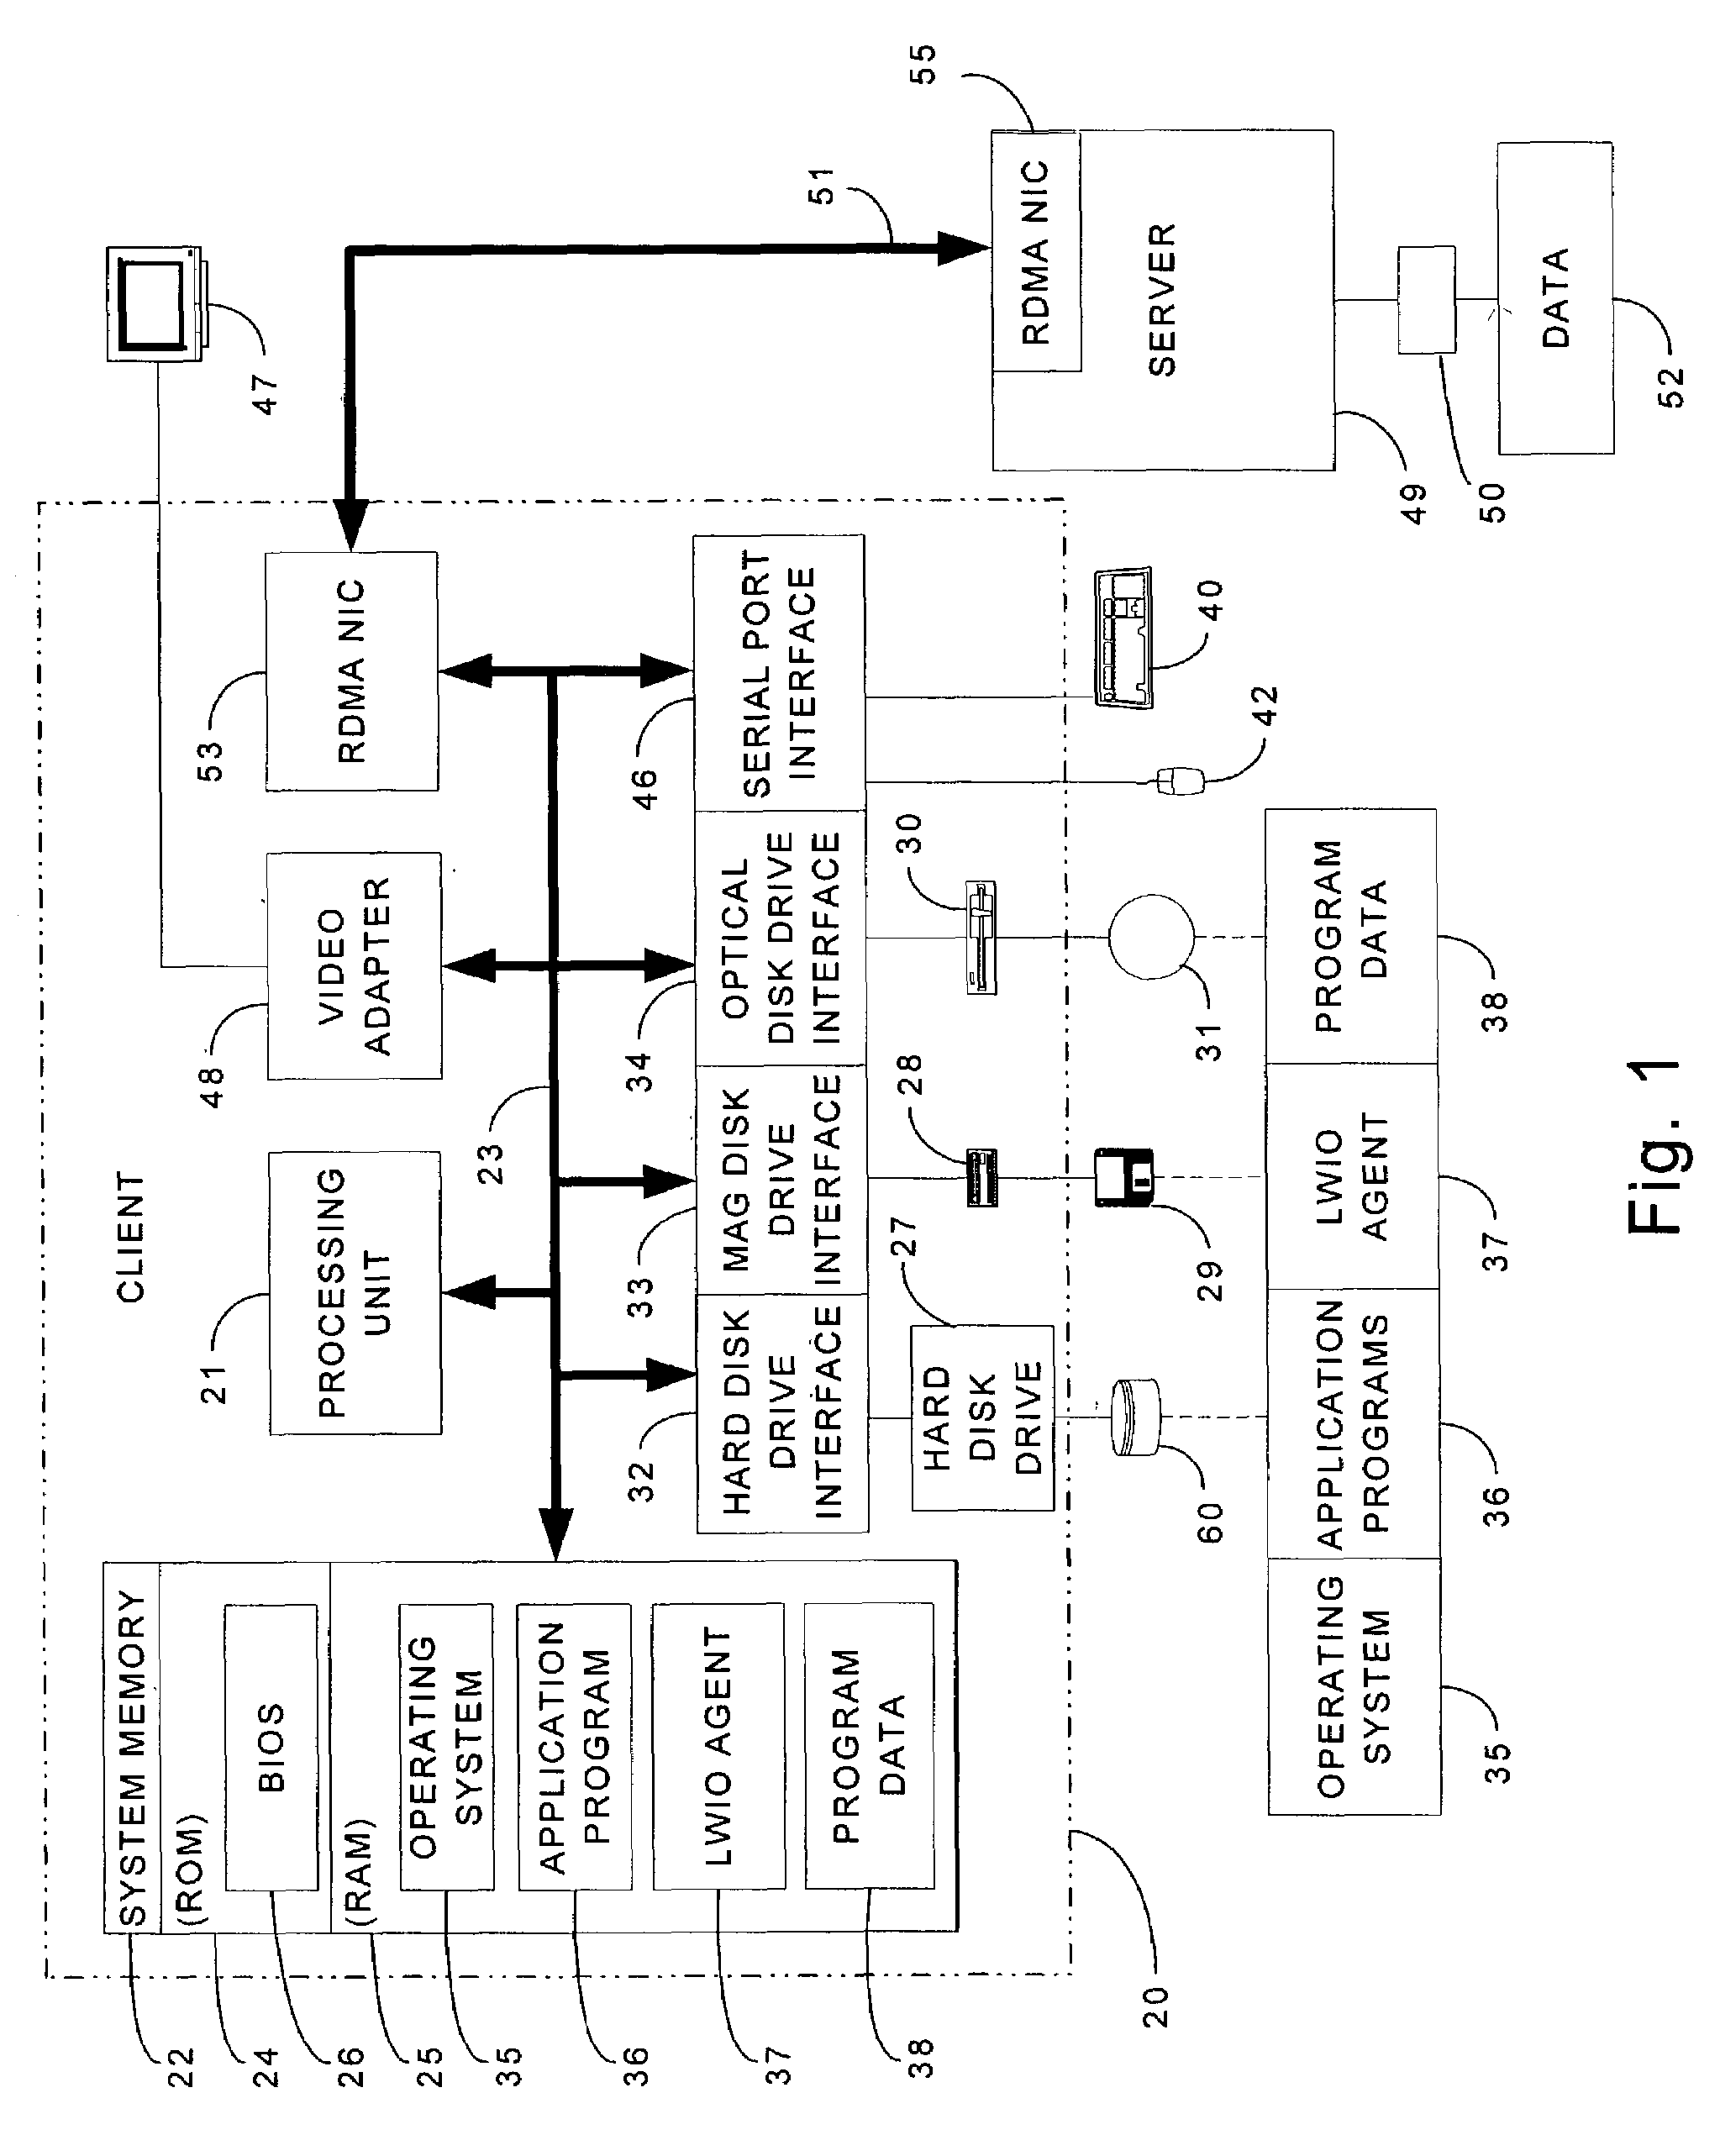 Light weight file I/O over system area networks